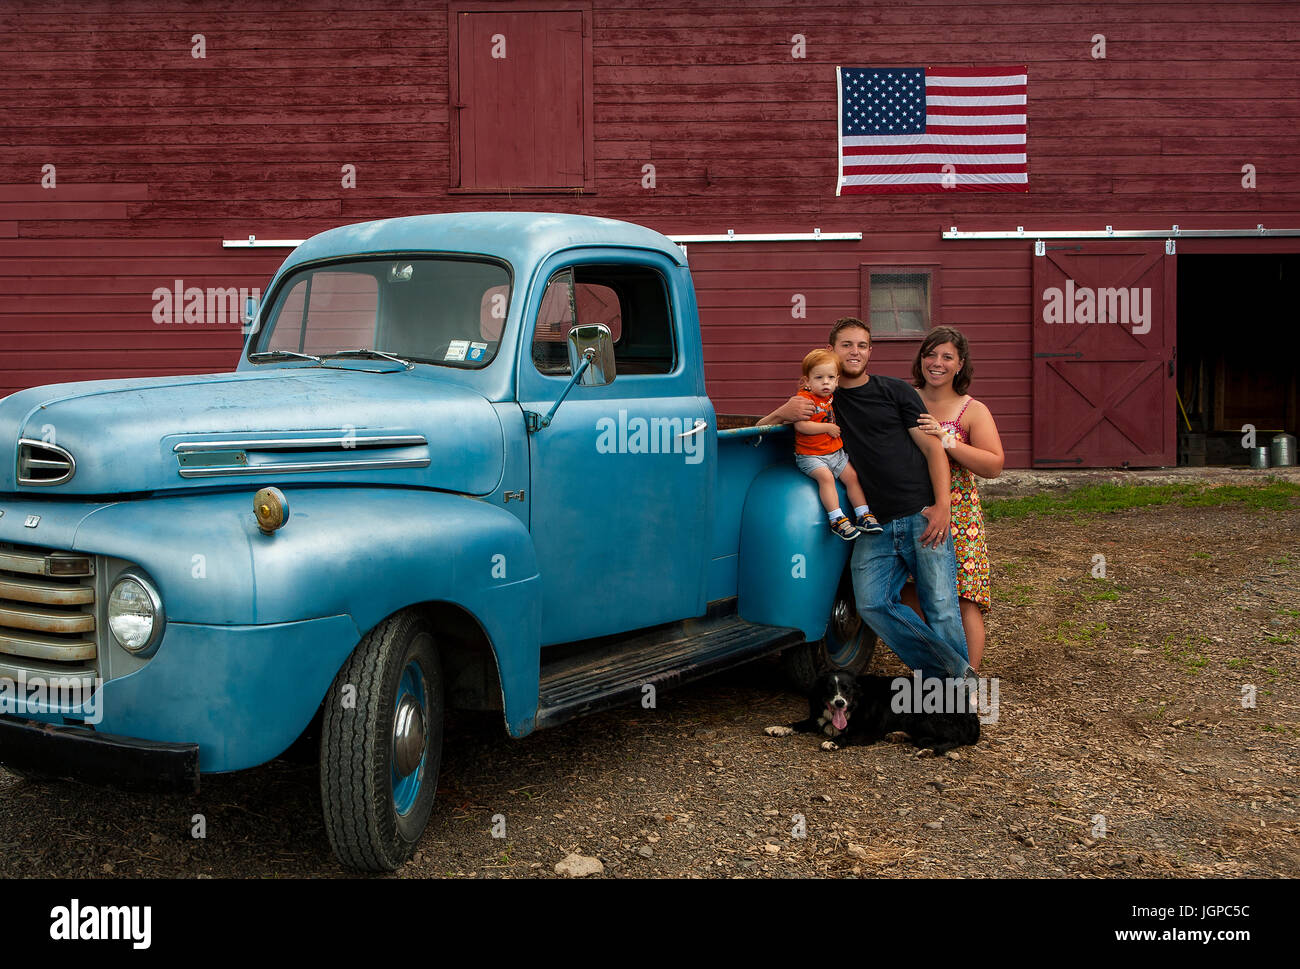 American Farm family with vintage blue truck in front of red barn with American flag, dog at feet, red headed toddler Stock Photo